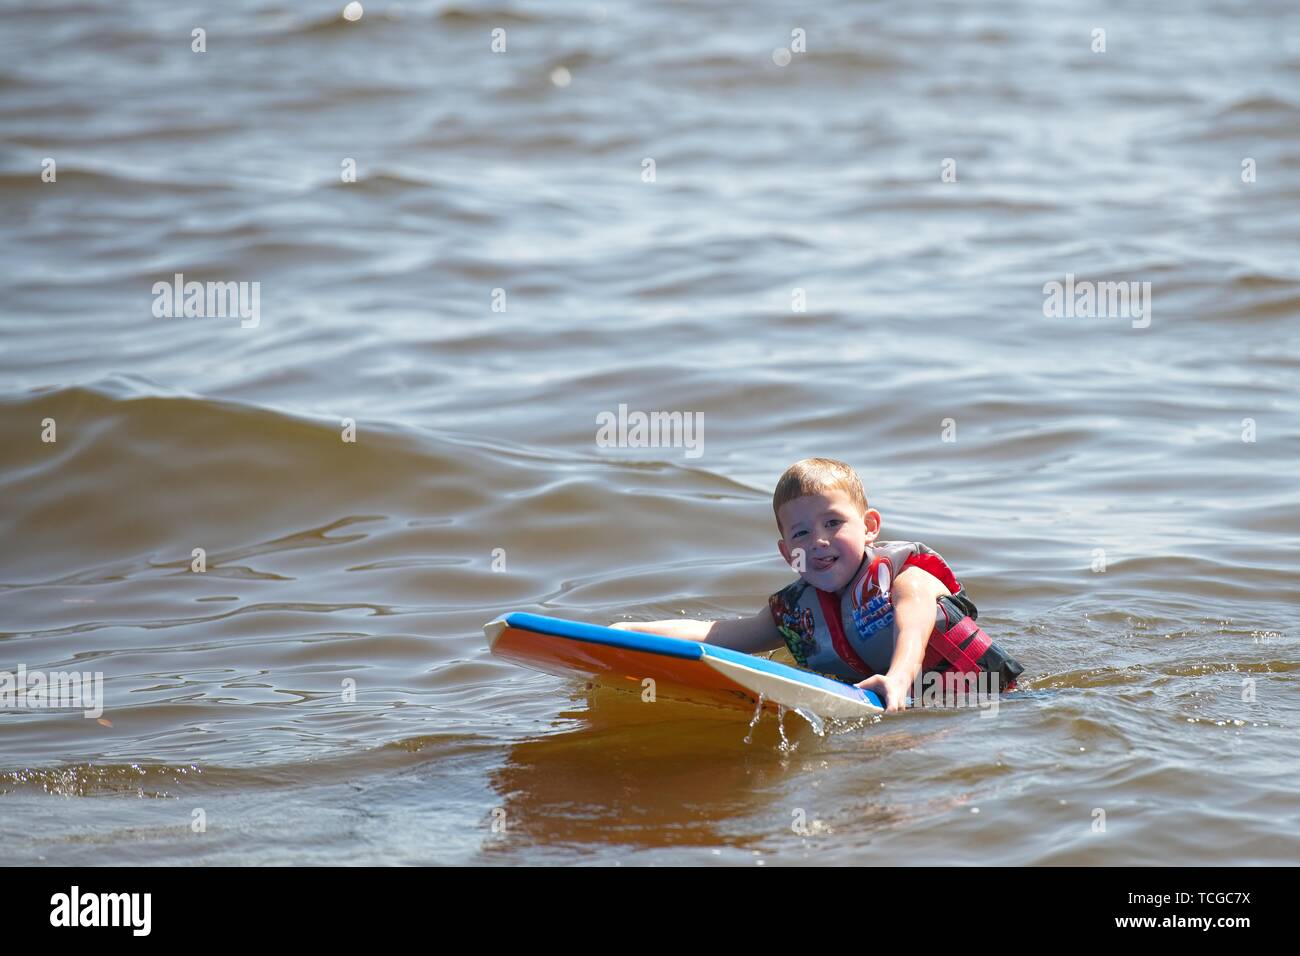 A young boy paddles on a surfboard in the calm water Stock Photo